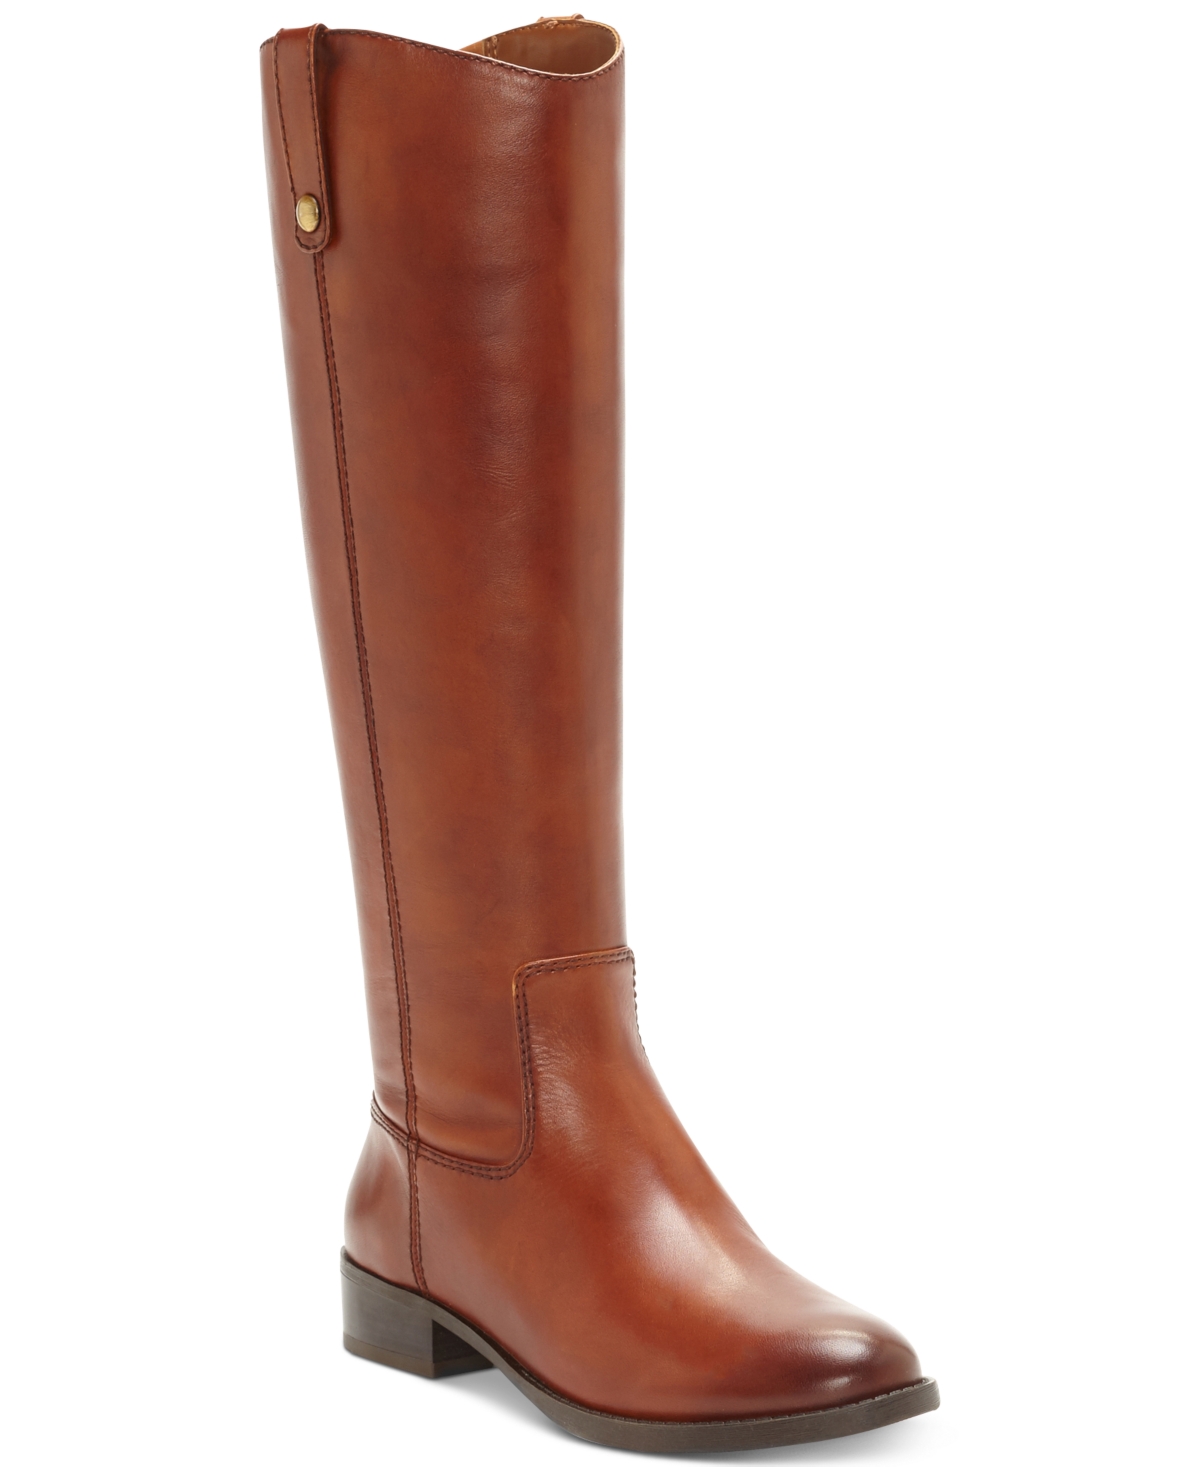 Fawne Wide-Calf Riding Leather Boots, Created for Macy's - Merlot